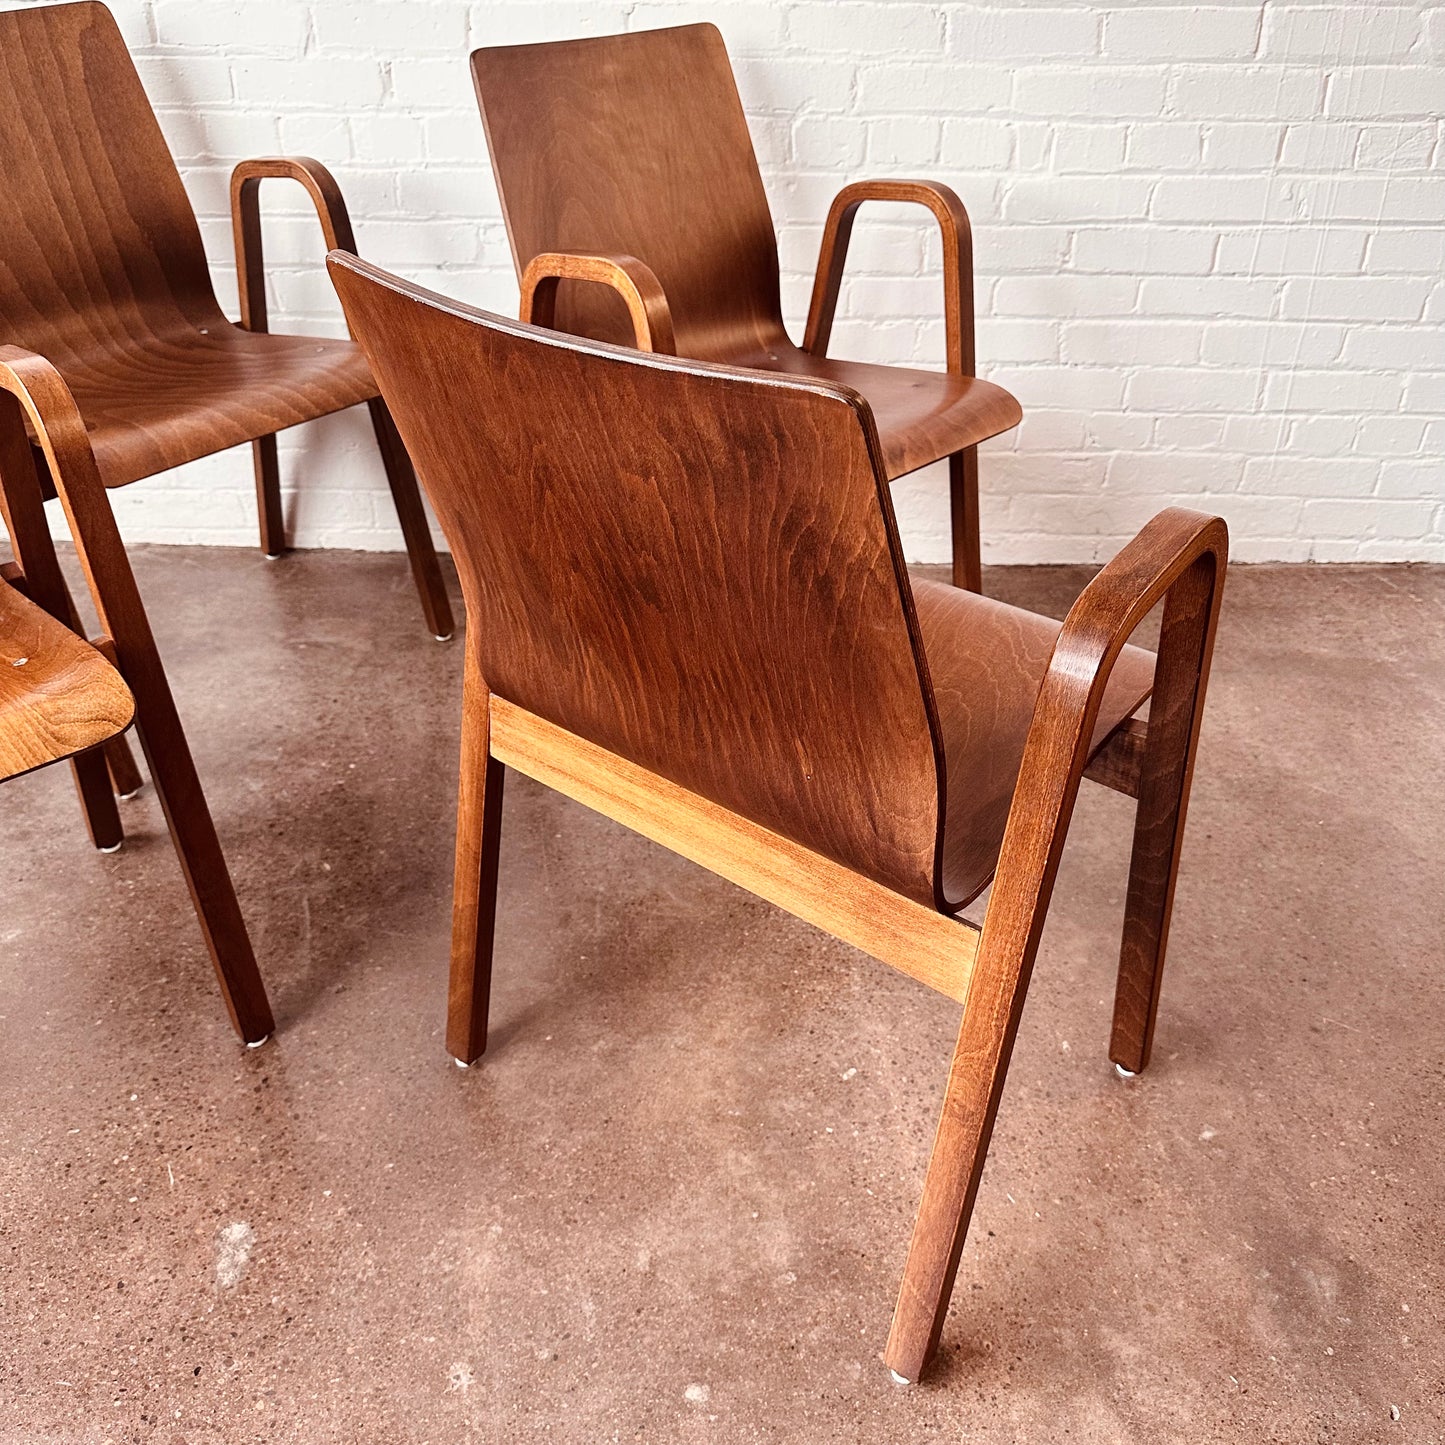 SET OF 4 BENTWOOD STACKING CHAIRS FROM HOLLAND